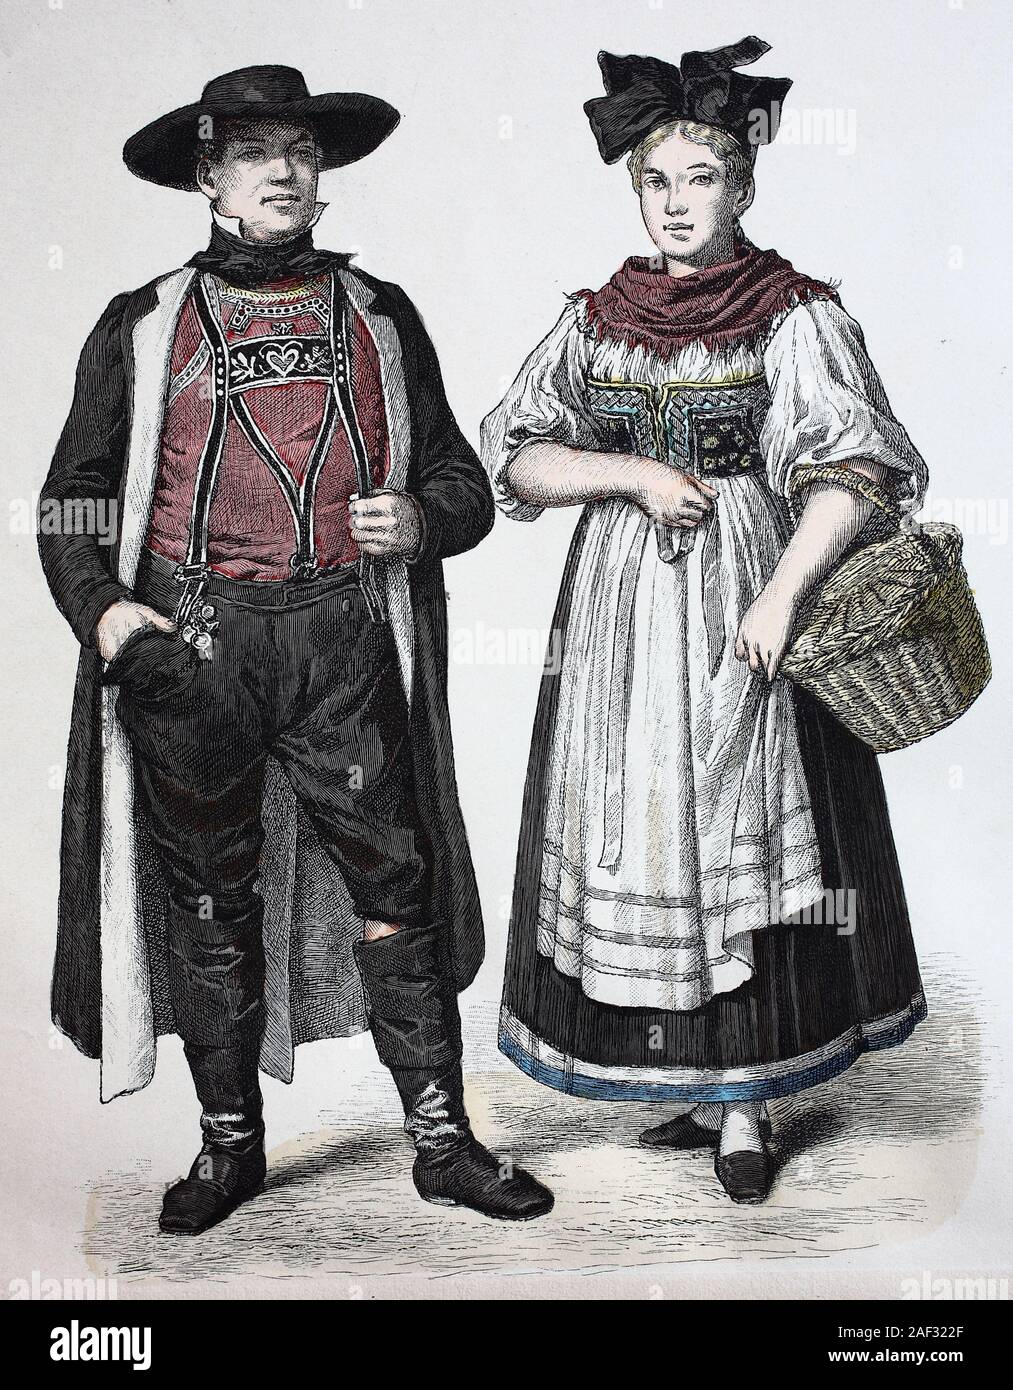 National costume, clothes, history of the costumes, pair from the Hanauer  country, national costumes from Baden, Germany, in 1885, Volkstracht,  Kleidung, Geschichte der Kostüme, Paar aus dem Hanauer Land, Trachten aus  Baden,